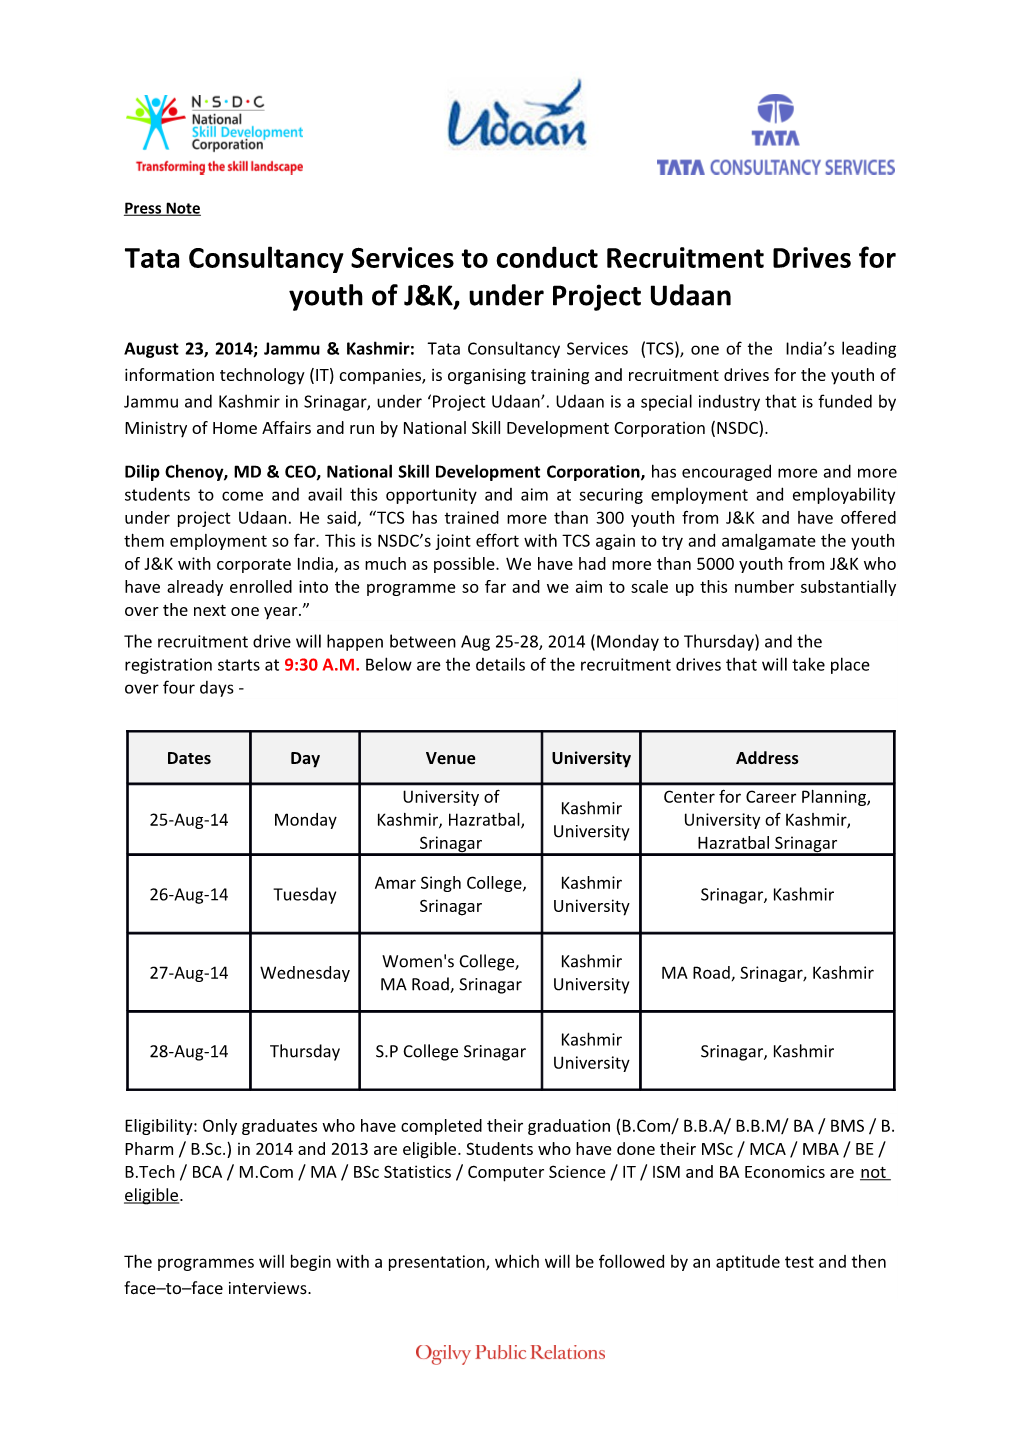 Tata Consultancy Services to Conduct Recruitment Drives for Youth of J&K, Under Project Udaan